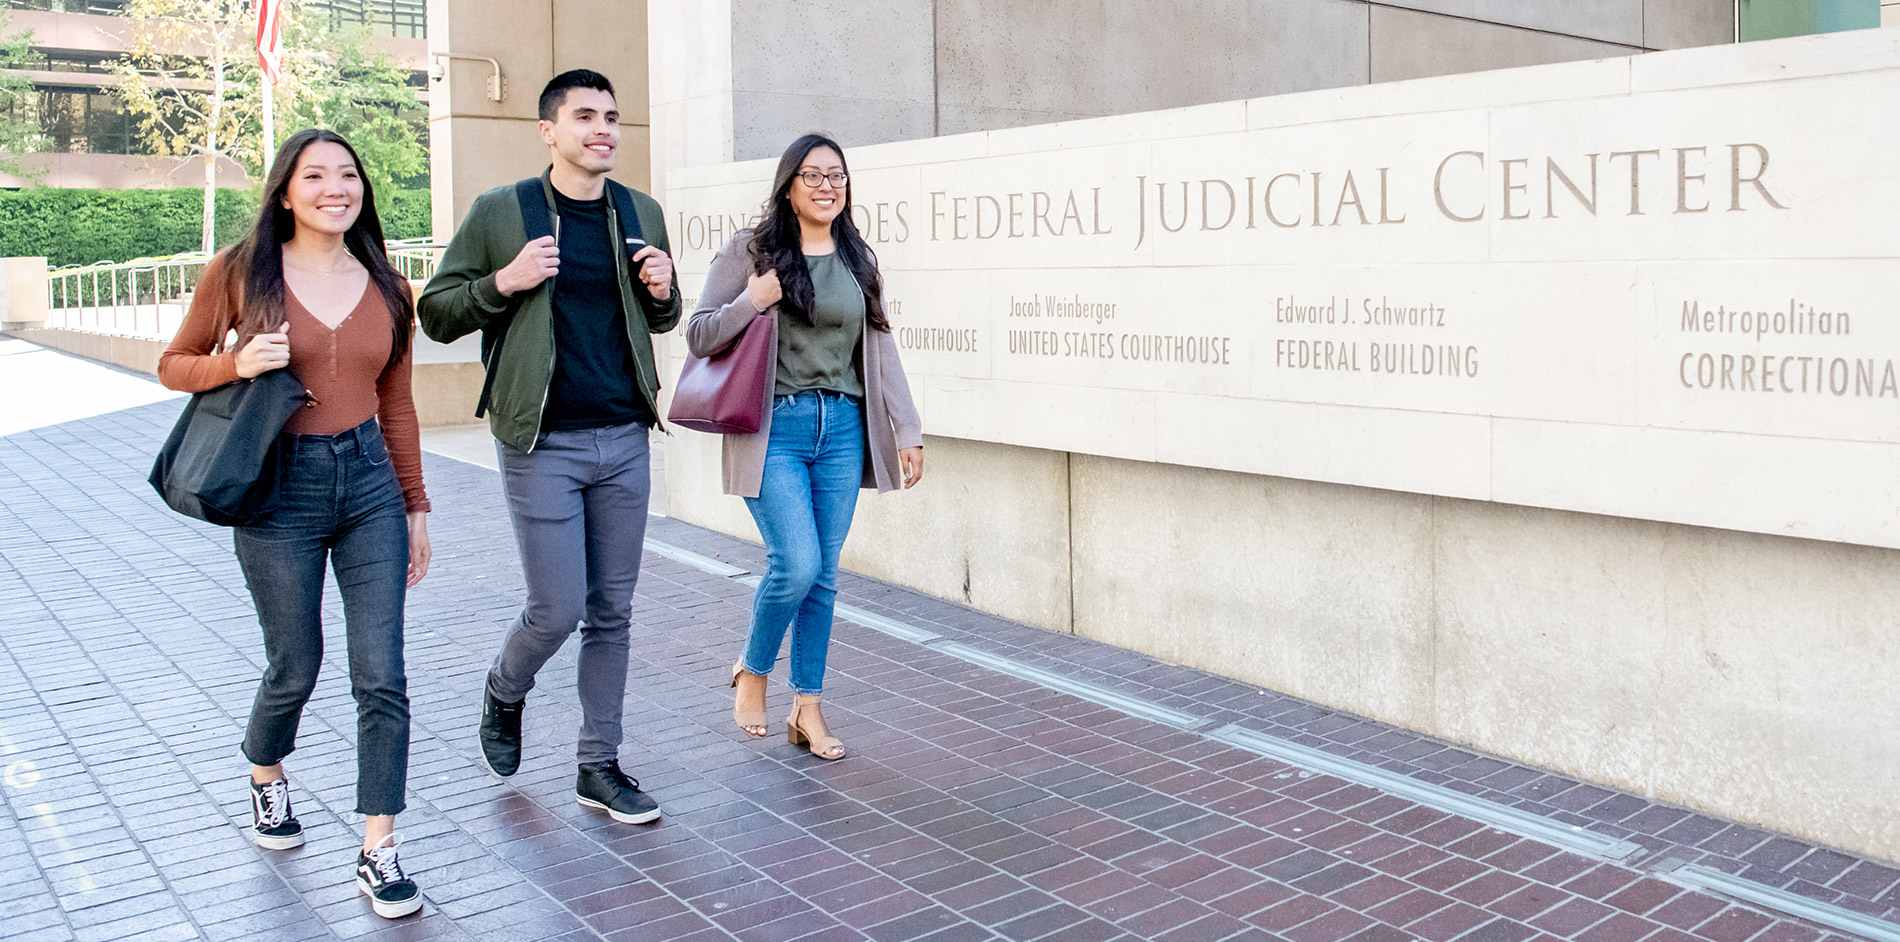 Students walking in front of Judicial Center in downtown San Diego